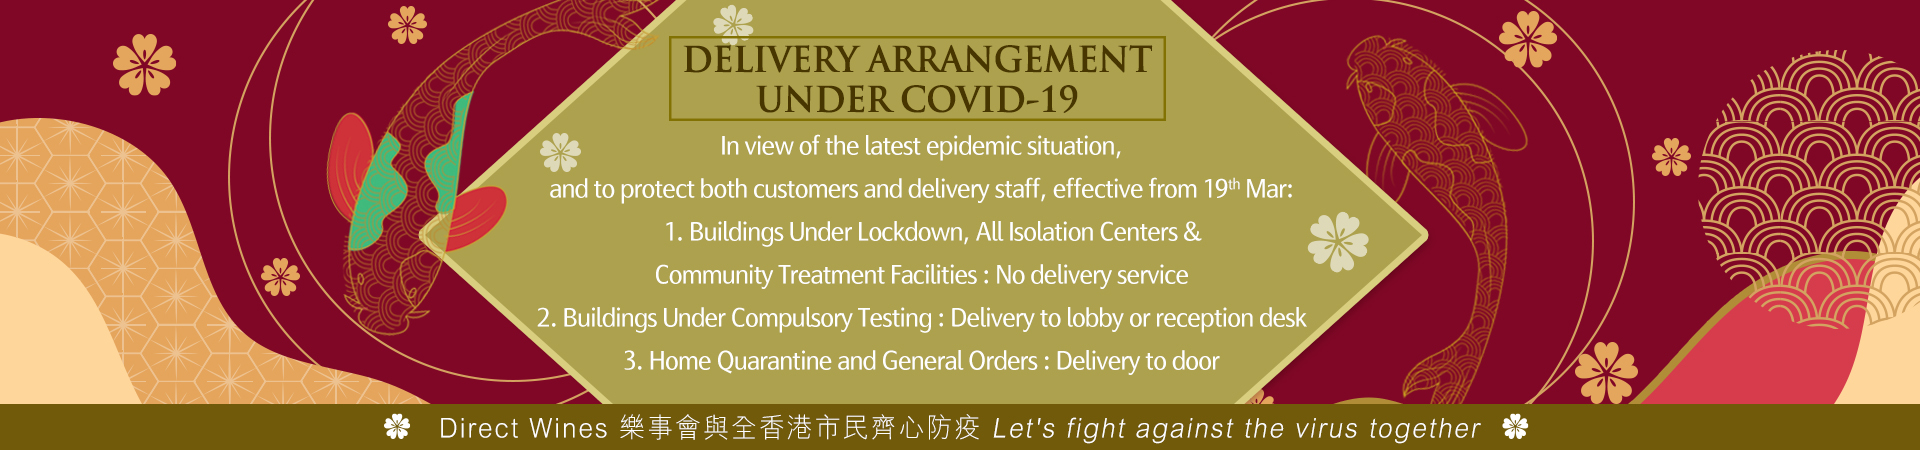 Special Delivery Arrangements During COVID-19 Pandemic